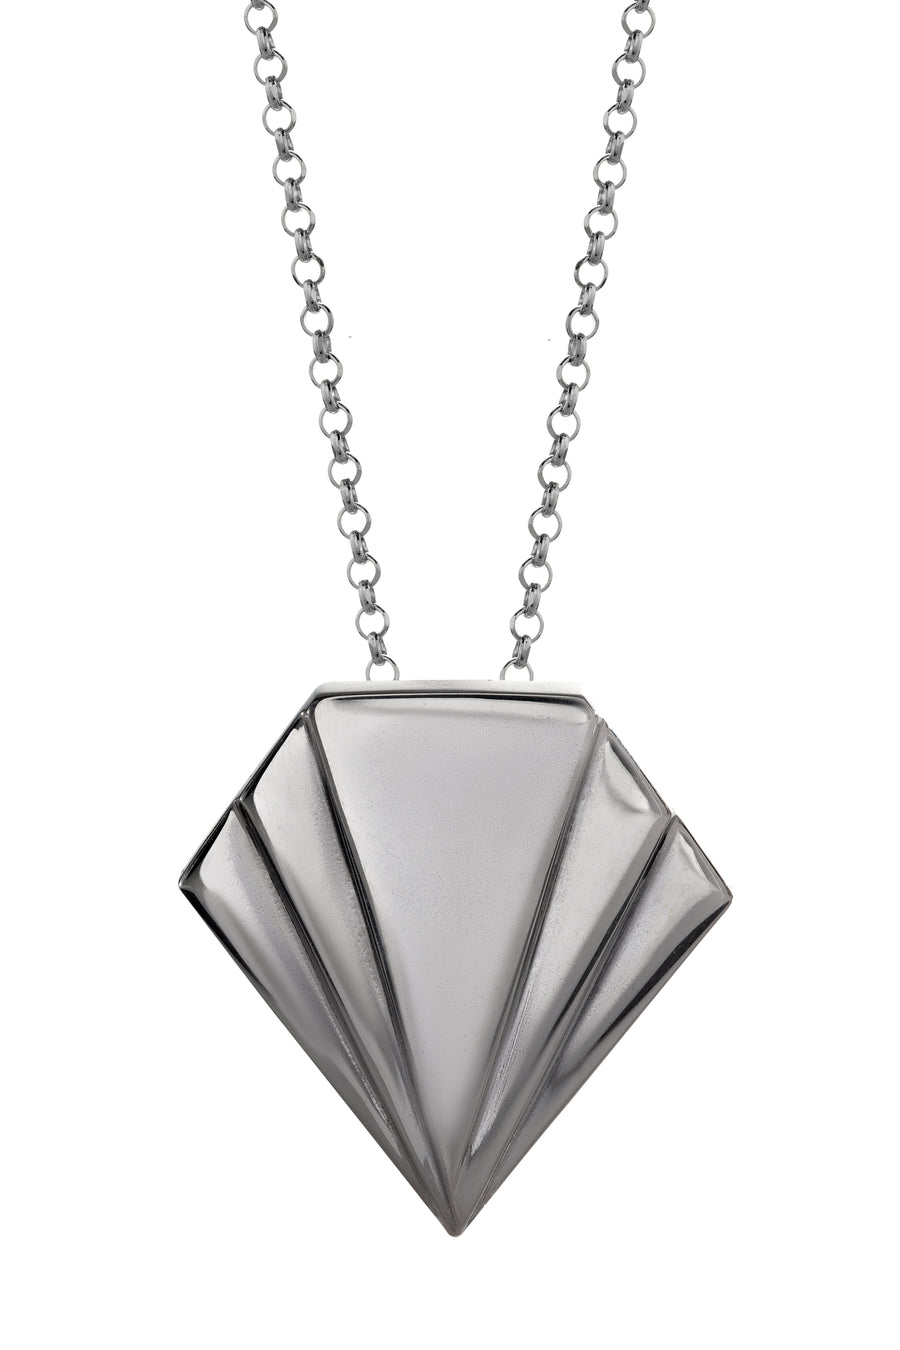 Silver art deco style pendant, merging at the base. Chunky statement pendant piece, hallmarked sterling silver - Coming Together Collection by Vanessa Ree